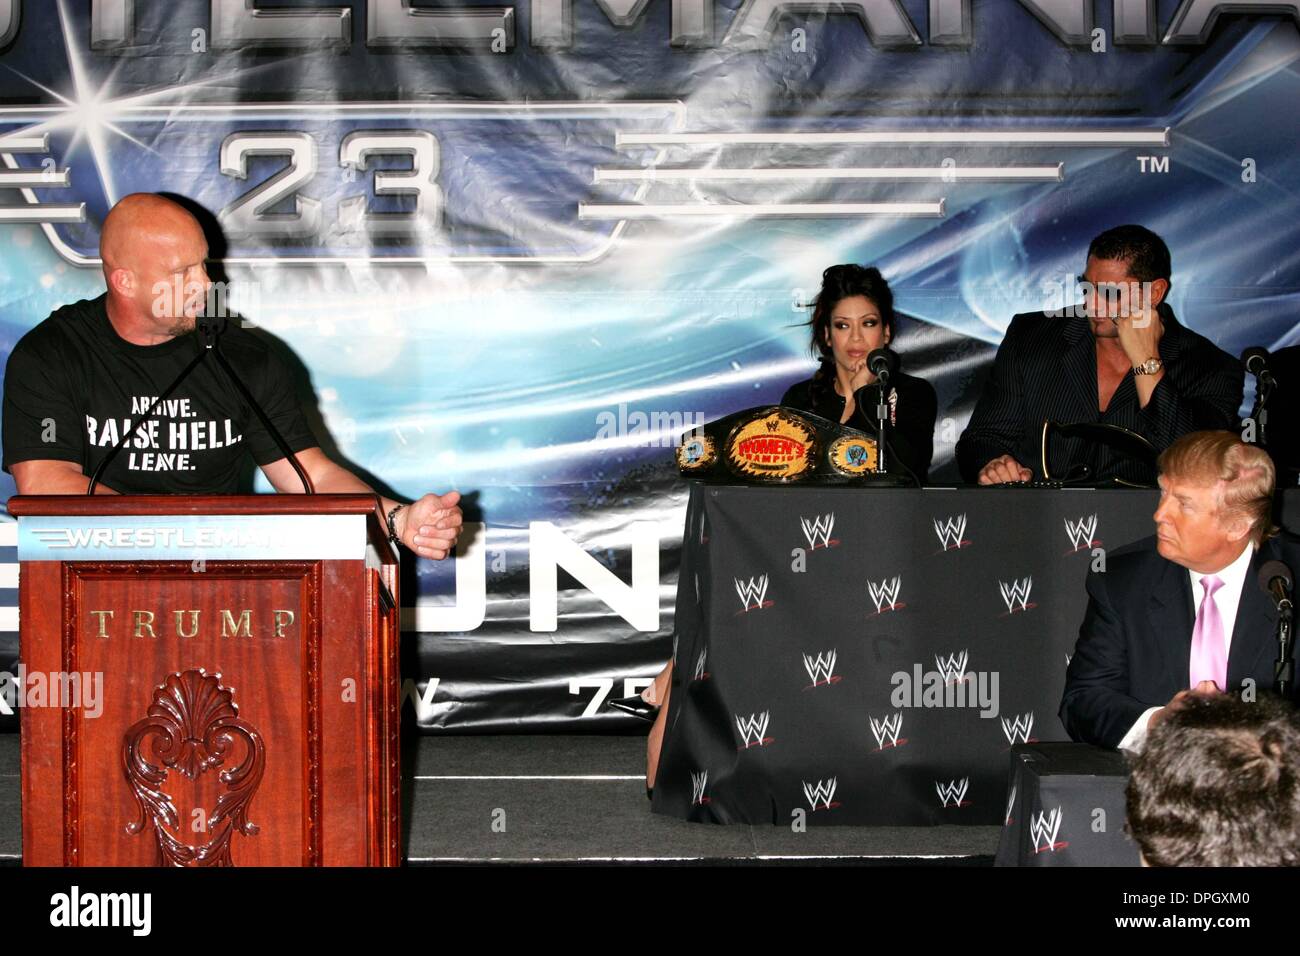 Mar. 27, 2006 - New York, New York, U.S. - A MOCK FIGHT BREAKS OUT  BETWEEN DONALD TRUMP AND VINCE McMAHON DURING A PRESS  CONFERENCE ANNOUNCING PLANS FOR WRESTLEMANIA 23, THE OUTCOME OF WHICH WILL SETTLE A BET BETWEEN TRUMP AND McMAHON IN WHICH THE LOSER HAS HIS HEAD SHAVED.TRUMP TOWERS  03-28-2007.       2007.STONE COLD STEVE AUSTIN, DONALD TRUMP AND WRESTLERS.K52377RM(Credit Ima Stock Photo